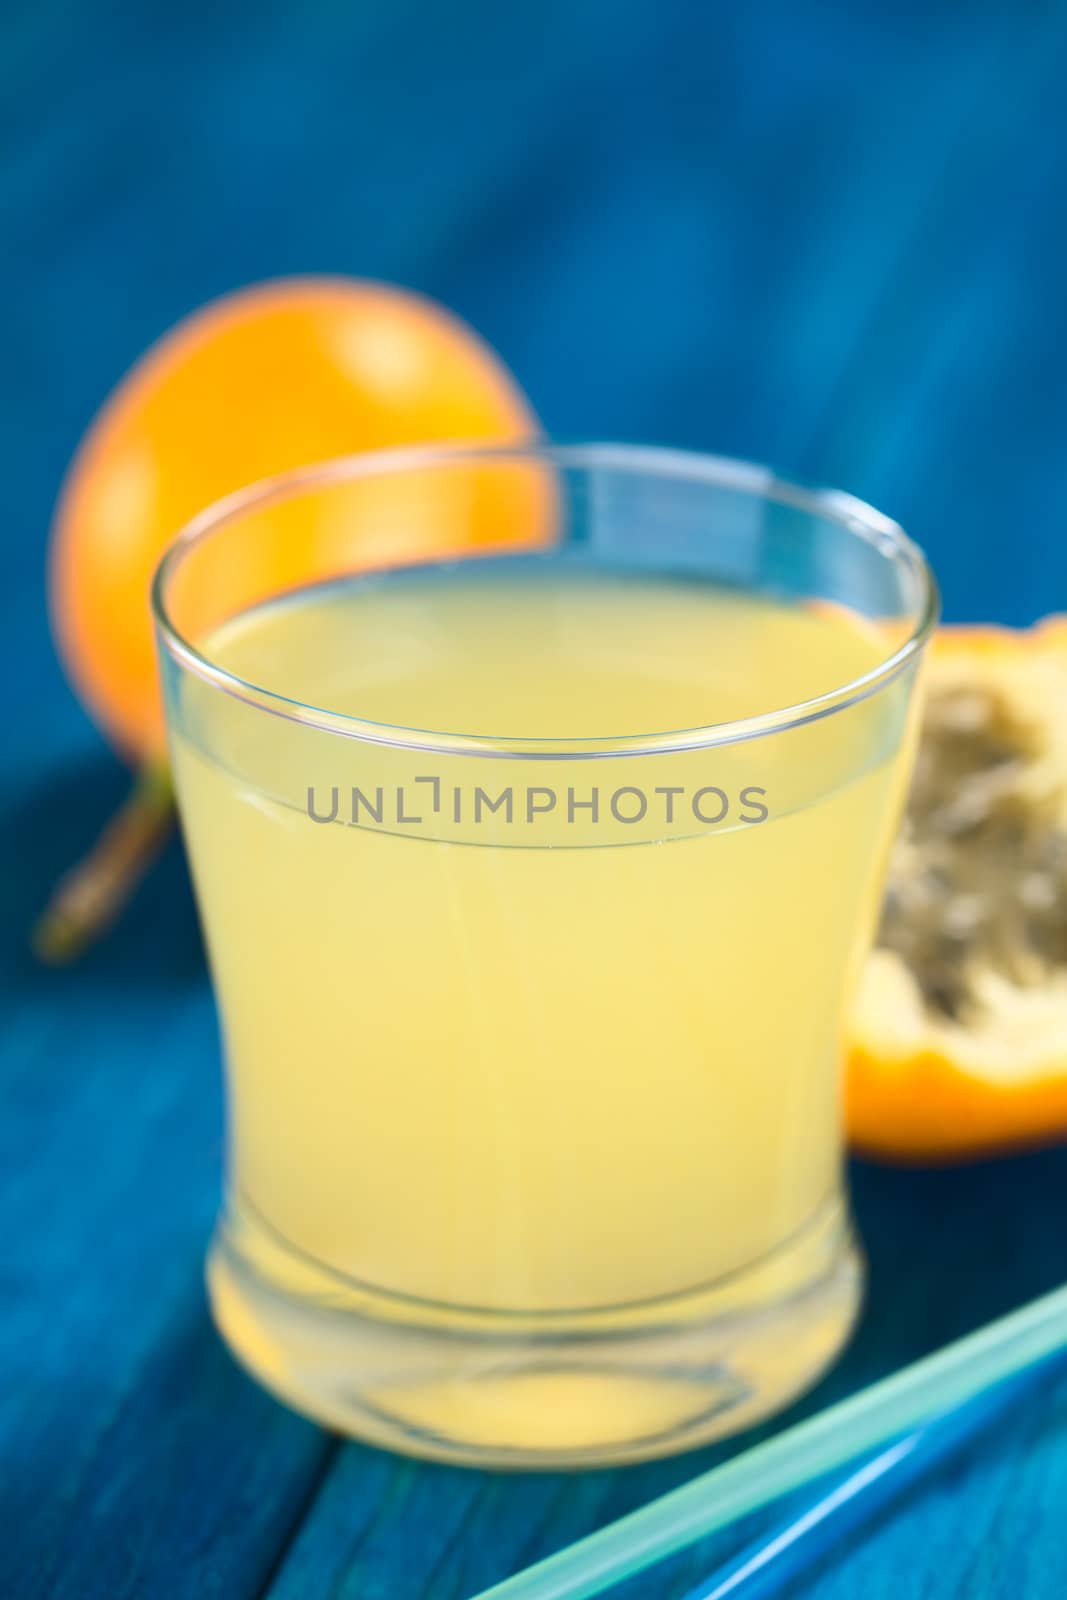 Fresh juice made of sweet granadilla or grenadia (lat. Passiflora ligularis) in glass with drinking straws in front (Selective Focus, Focus on the front rim of the glass)